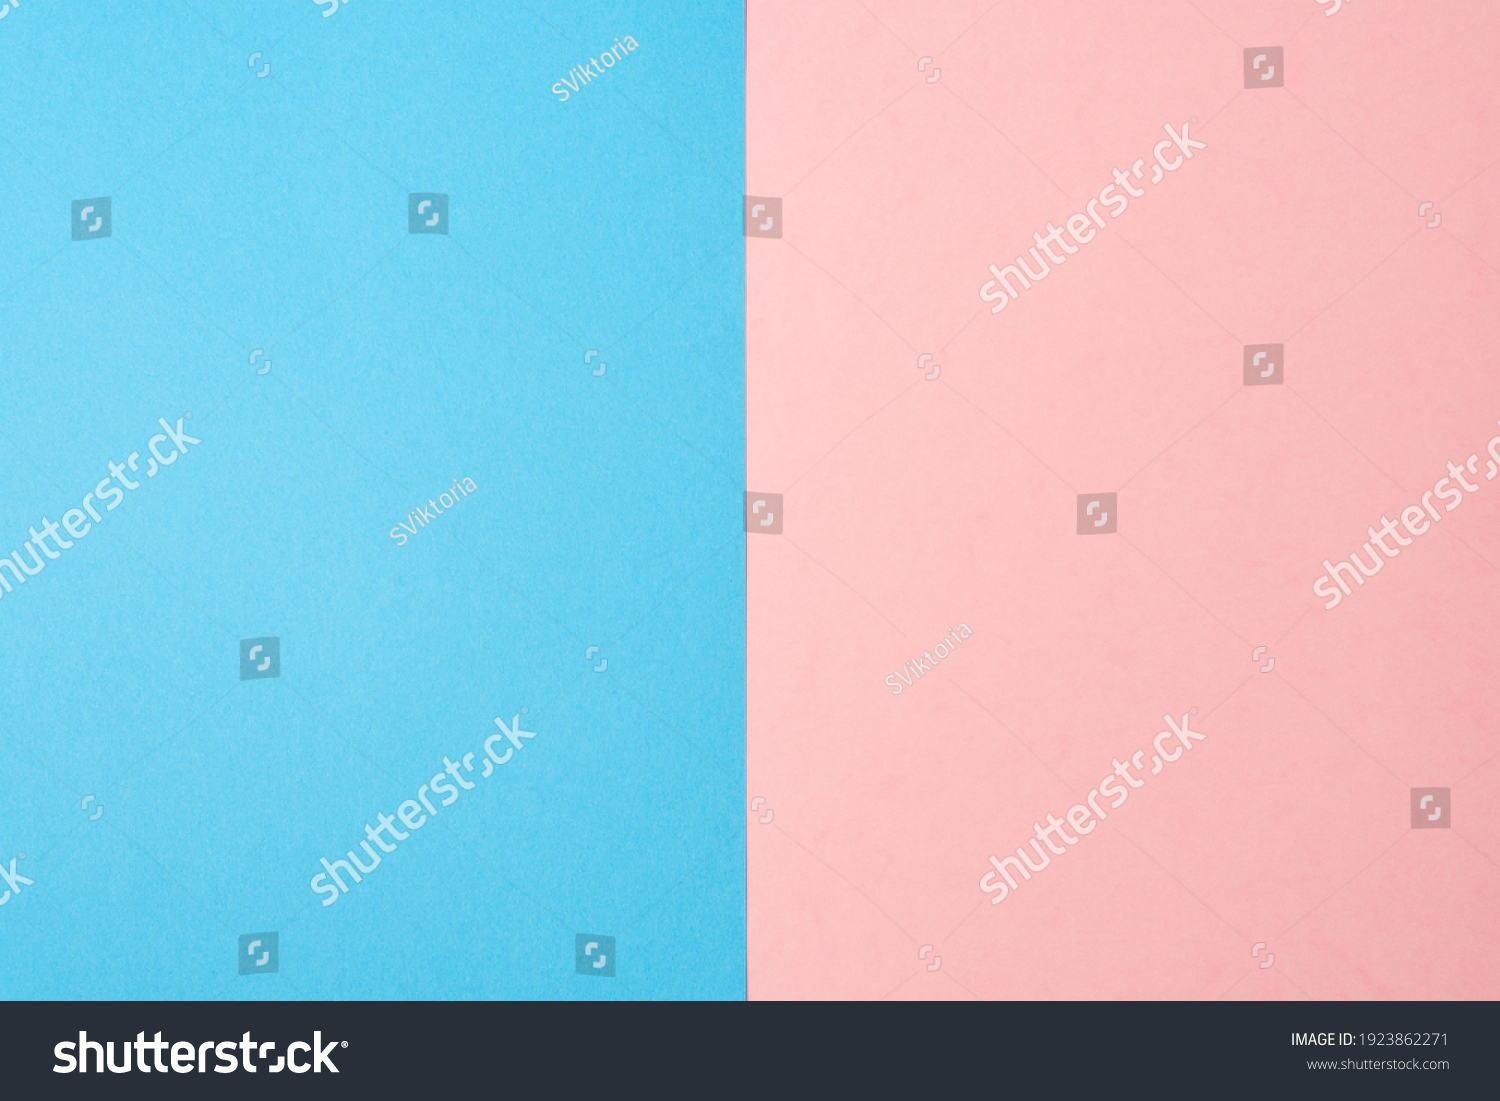 Background of two vertical rectangles blue and pink. Sheets of blank blue and pink paper split vertically. #1923862271